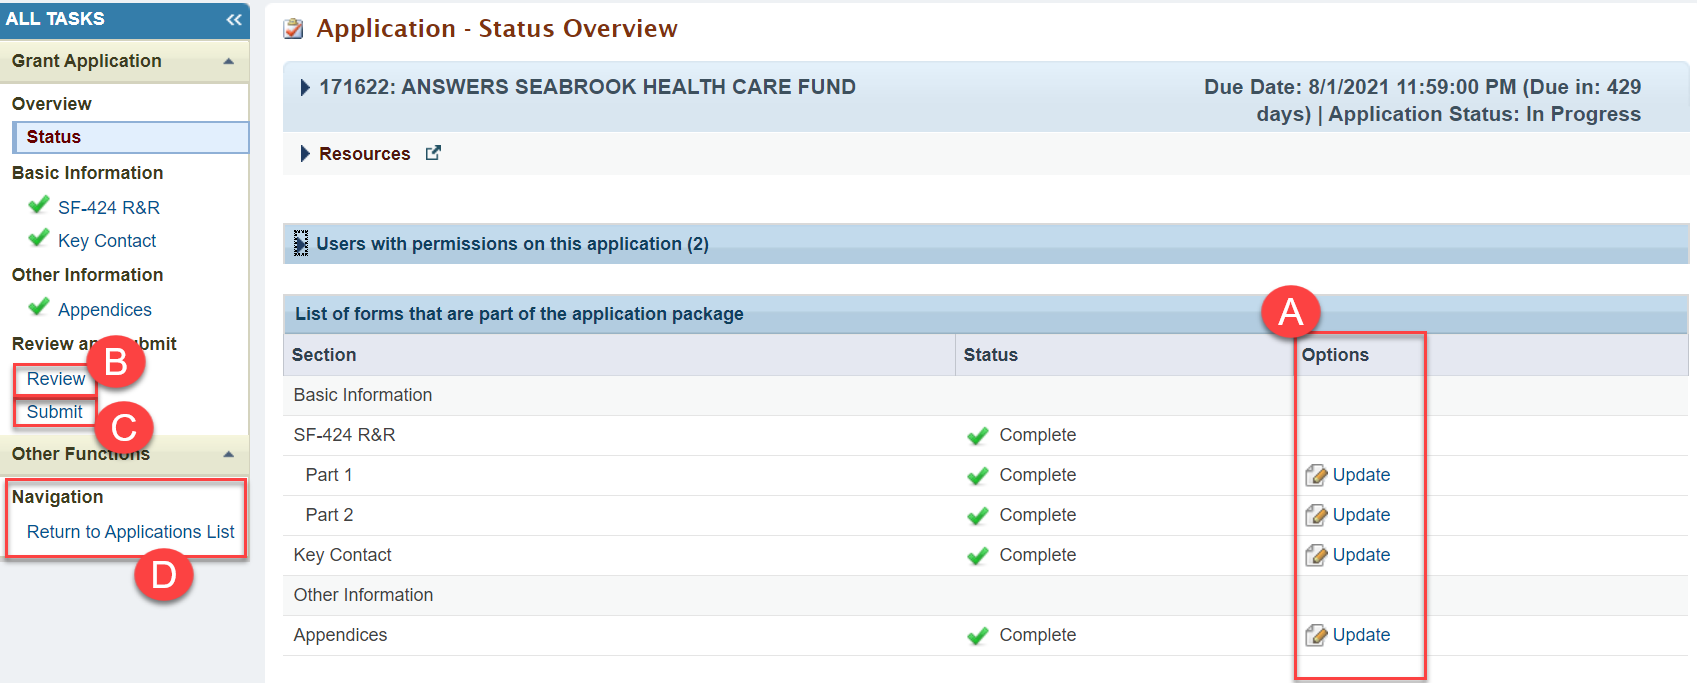 Screenshot of Application - Status Overview for Application Owners